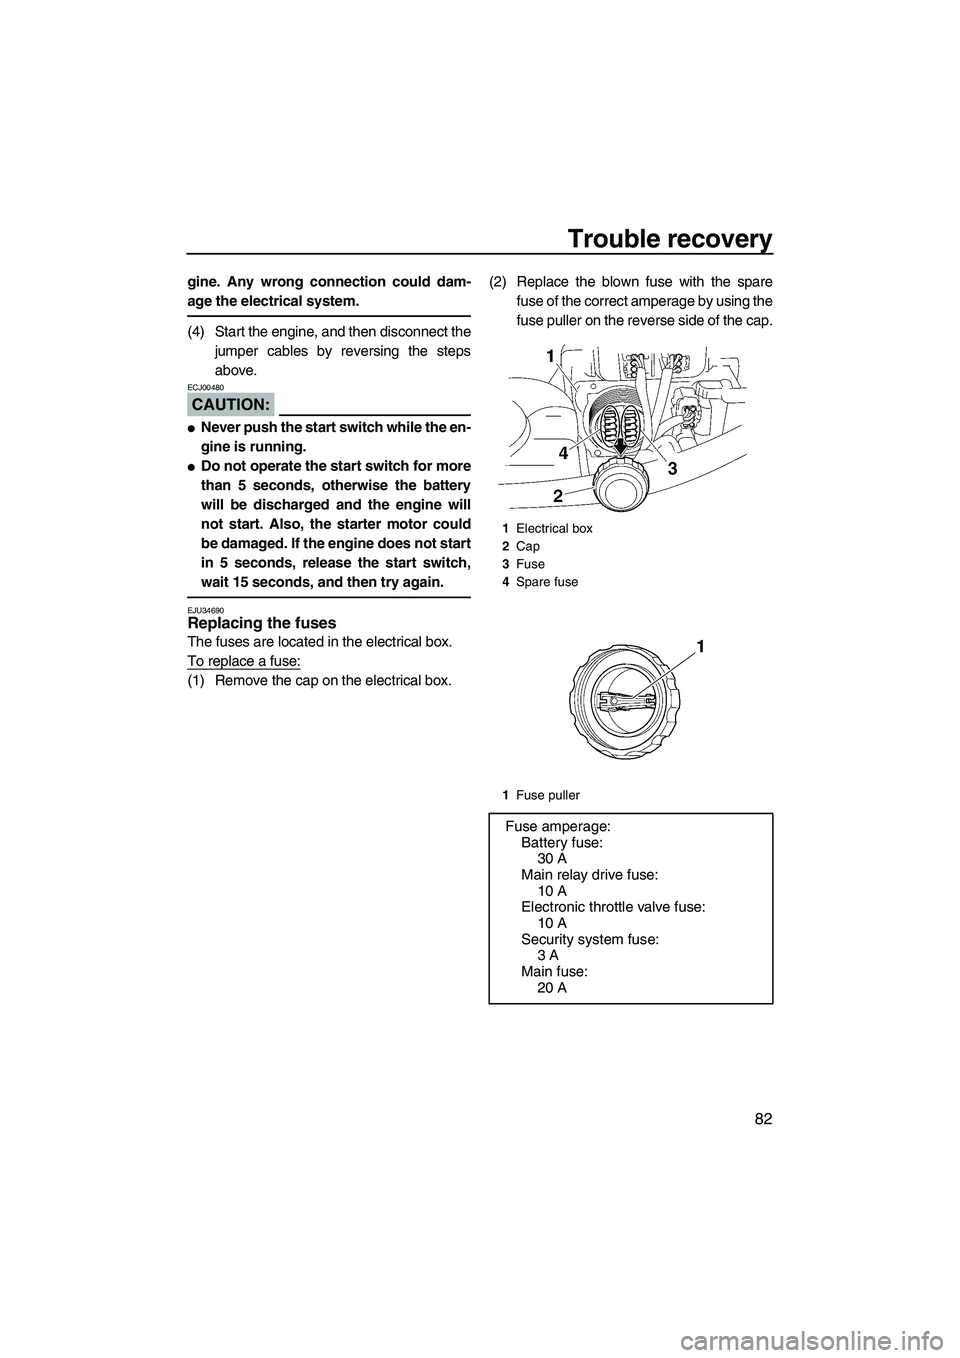 YAMAHA VX SPORT 2008  Owners Manual Trouble recovery
82
gine. Any wrong connection could dam-
age the electrical system.
(4) Start the engine, and then disconnect the
jumper cables by reversing the steps
above.
CAUTION:
ECJ00480
Never 